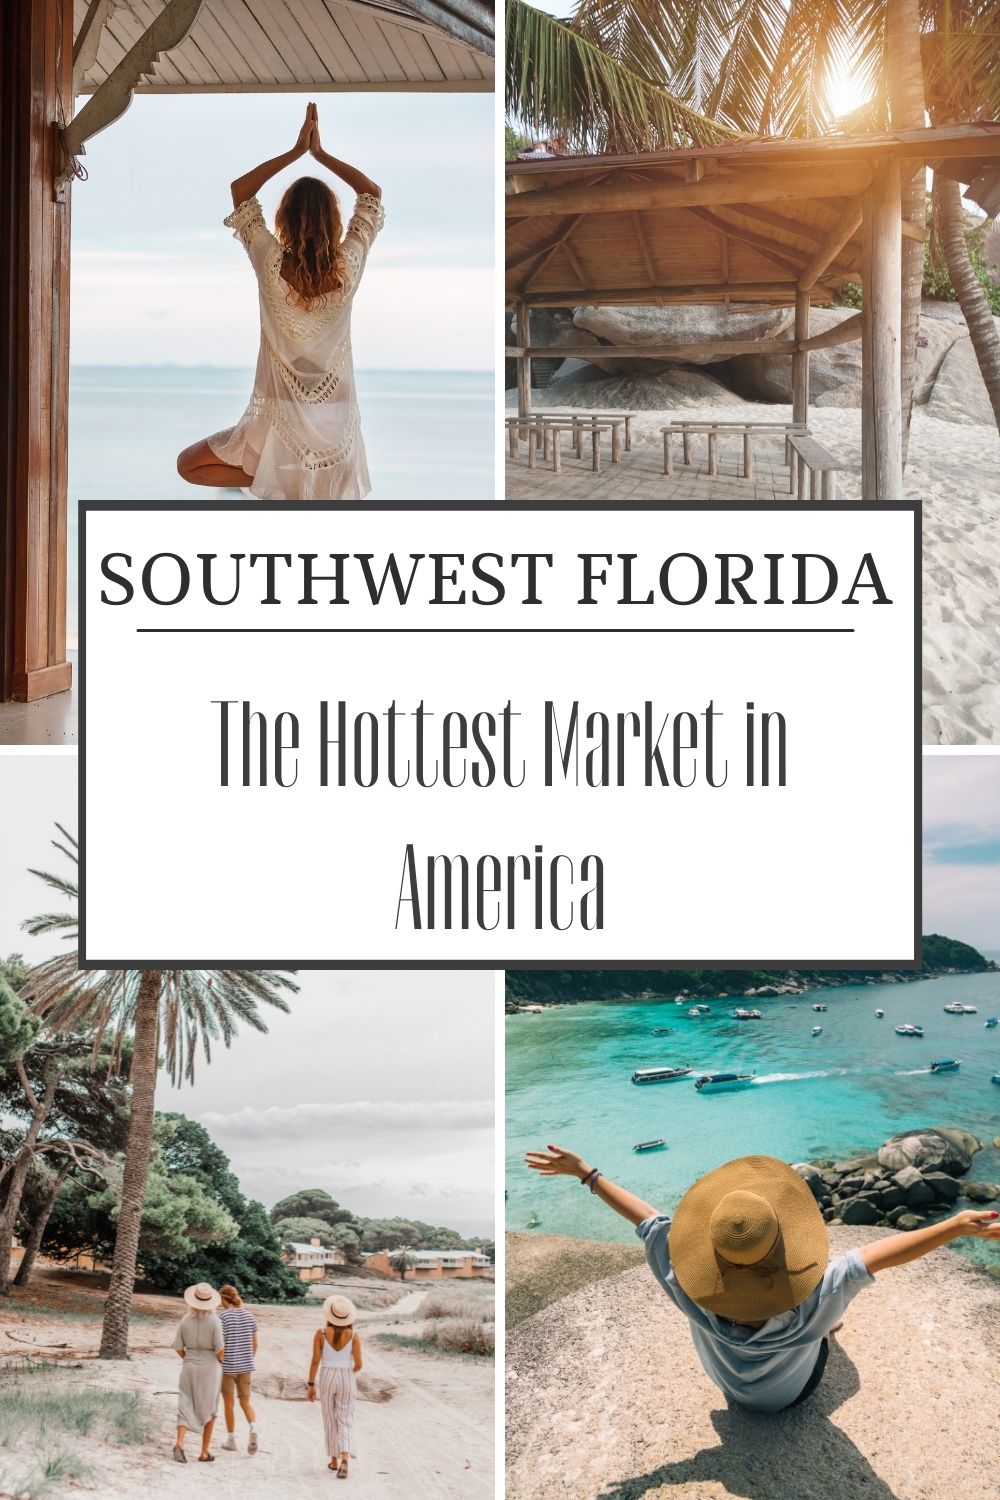 Southwest Florida Has One of the Hottest Markets in America